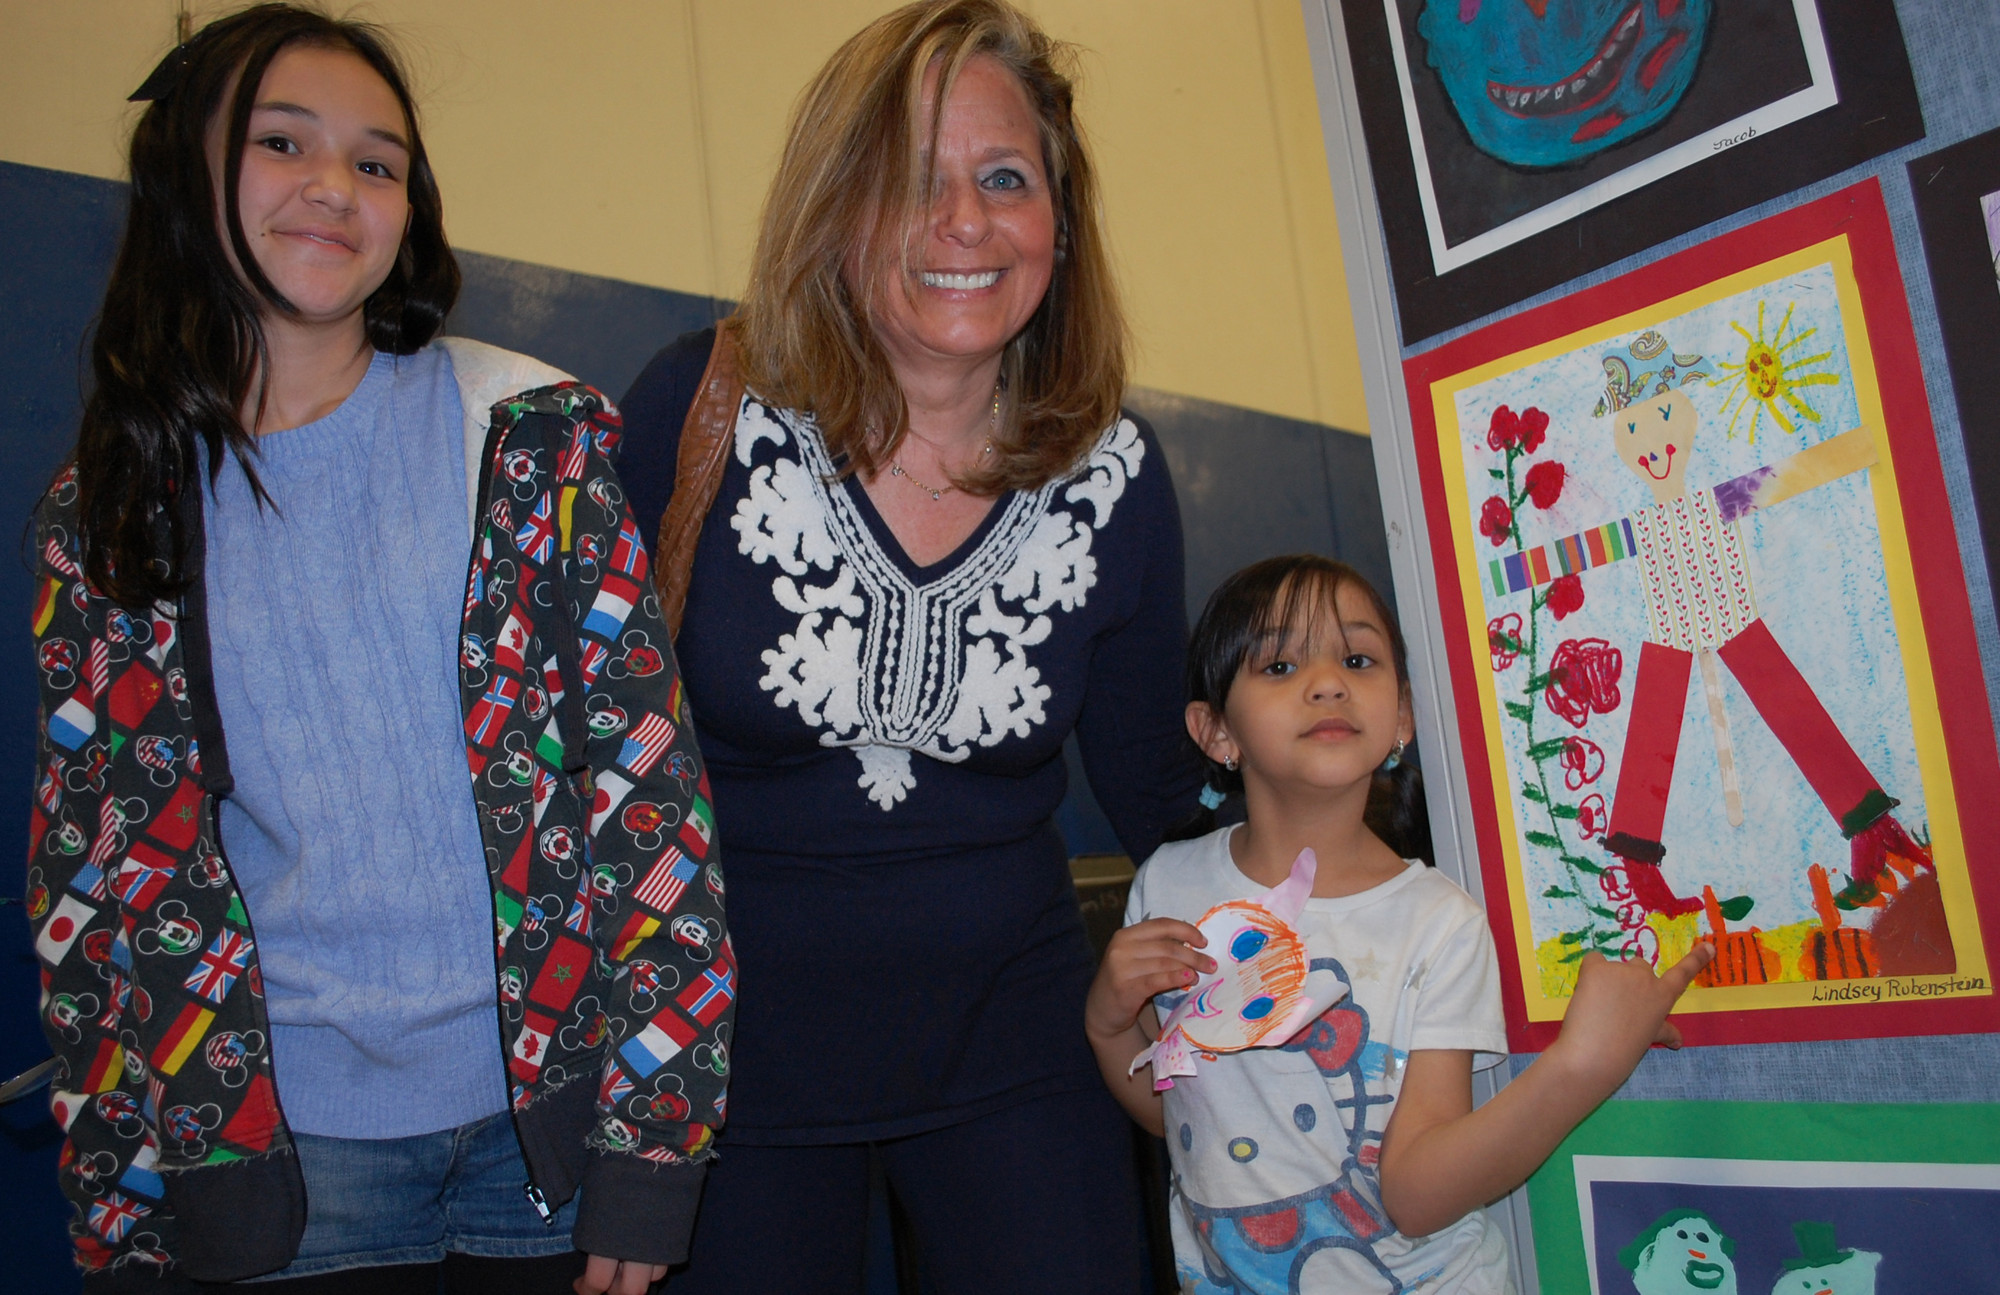 Lindsey Rubenstein, right, a first-grader at Brooklyn Avenue School, joined by her sister Denise and art teacher Jane Berzner, shows her piece in the District 24 art show.